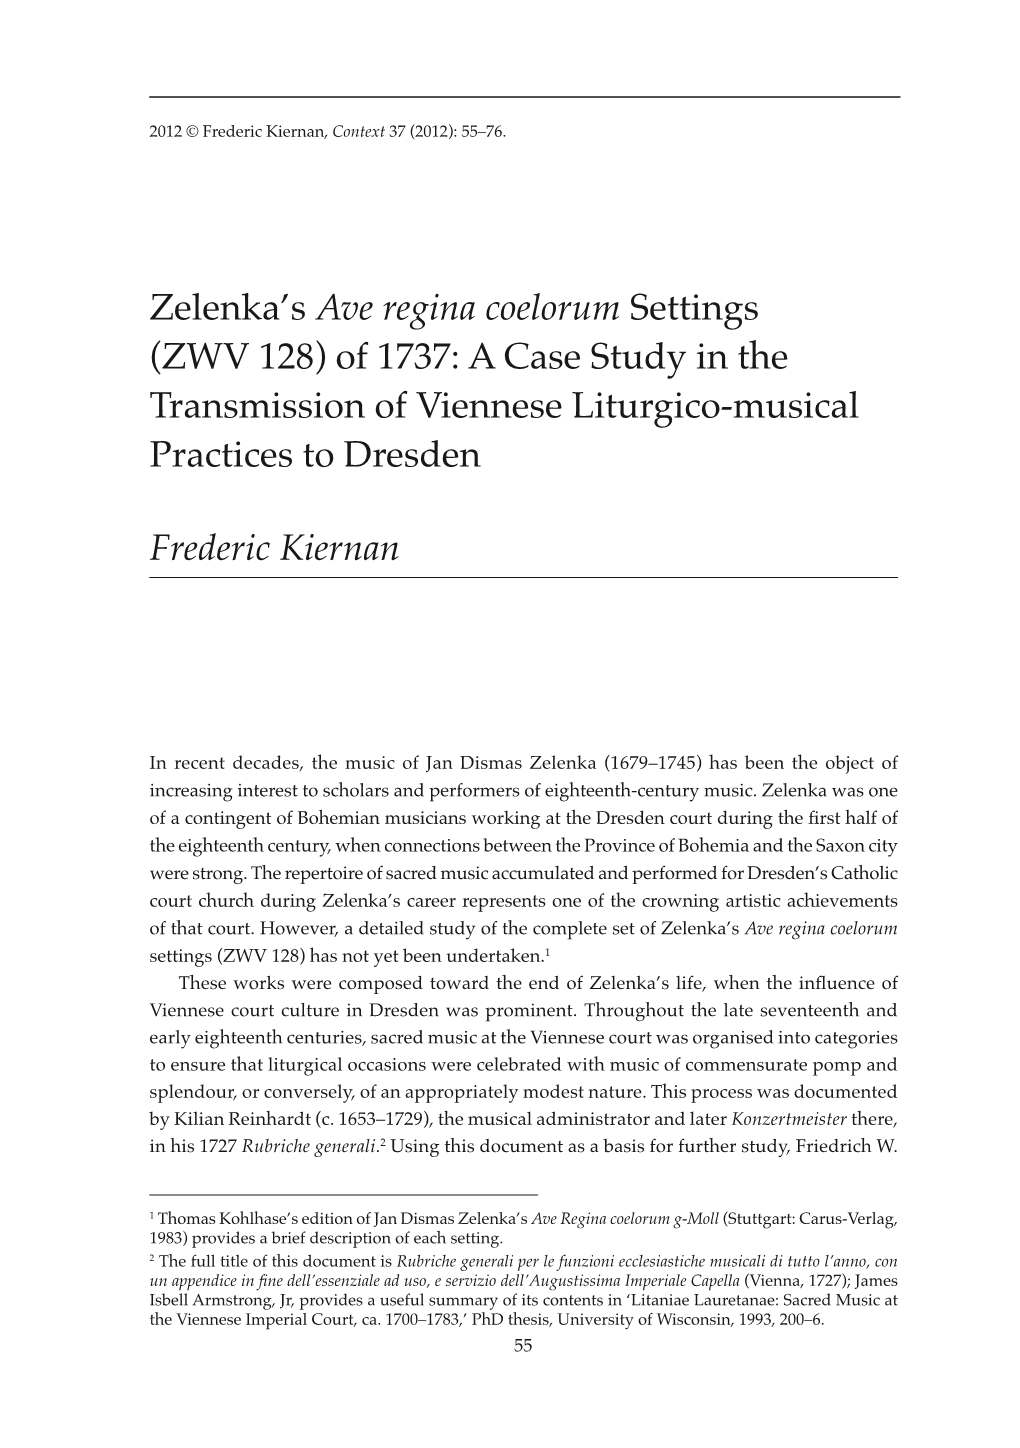 Zelenka's Ave Regina Coelorum Settings (ZWV 128) of 1737: a Case Study in the Transmission of Viennese Liturgico-Musical Practices to Dresden